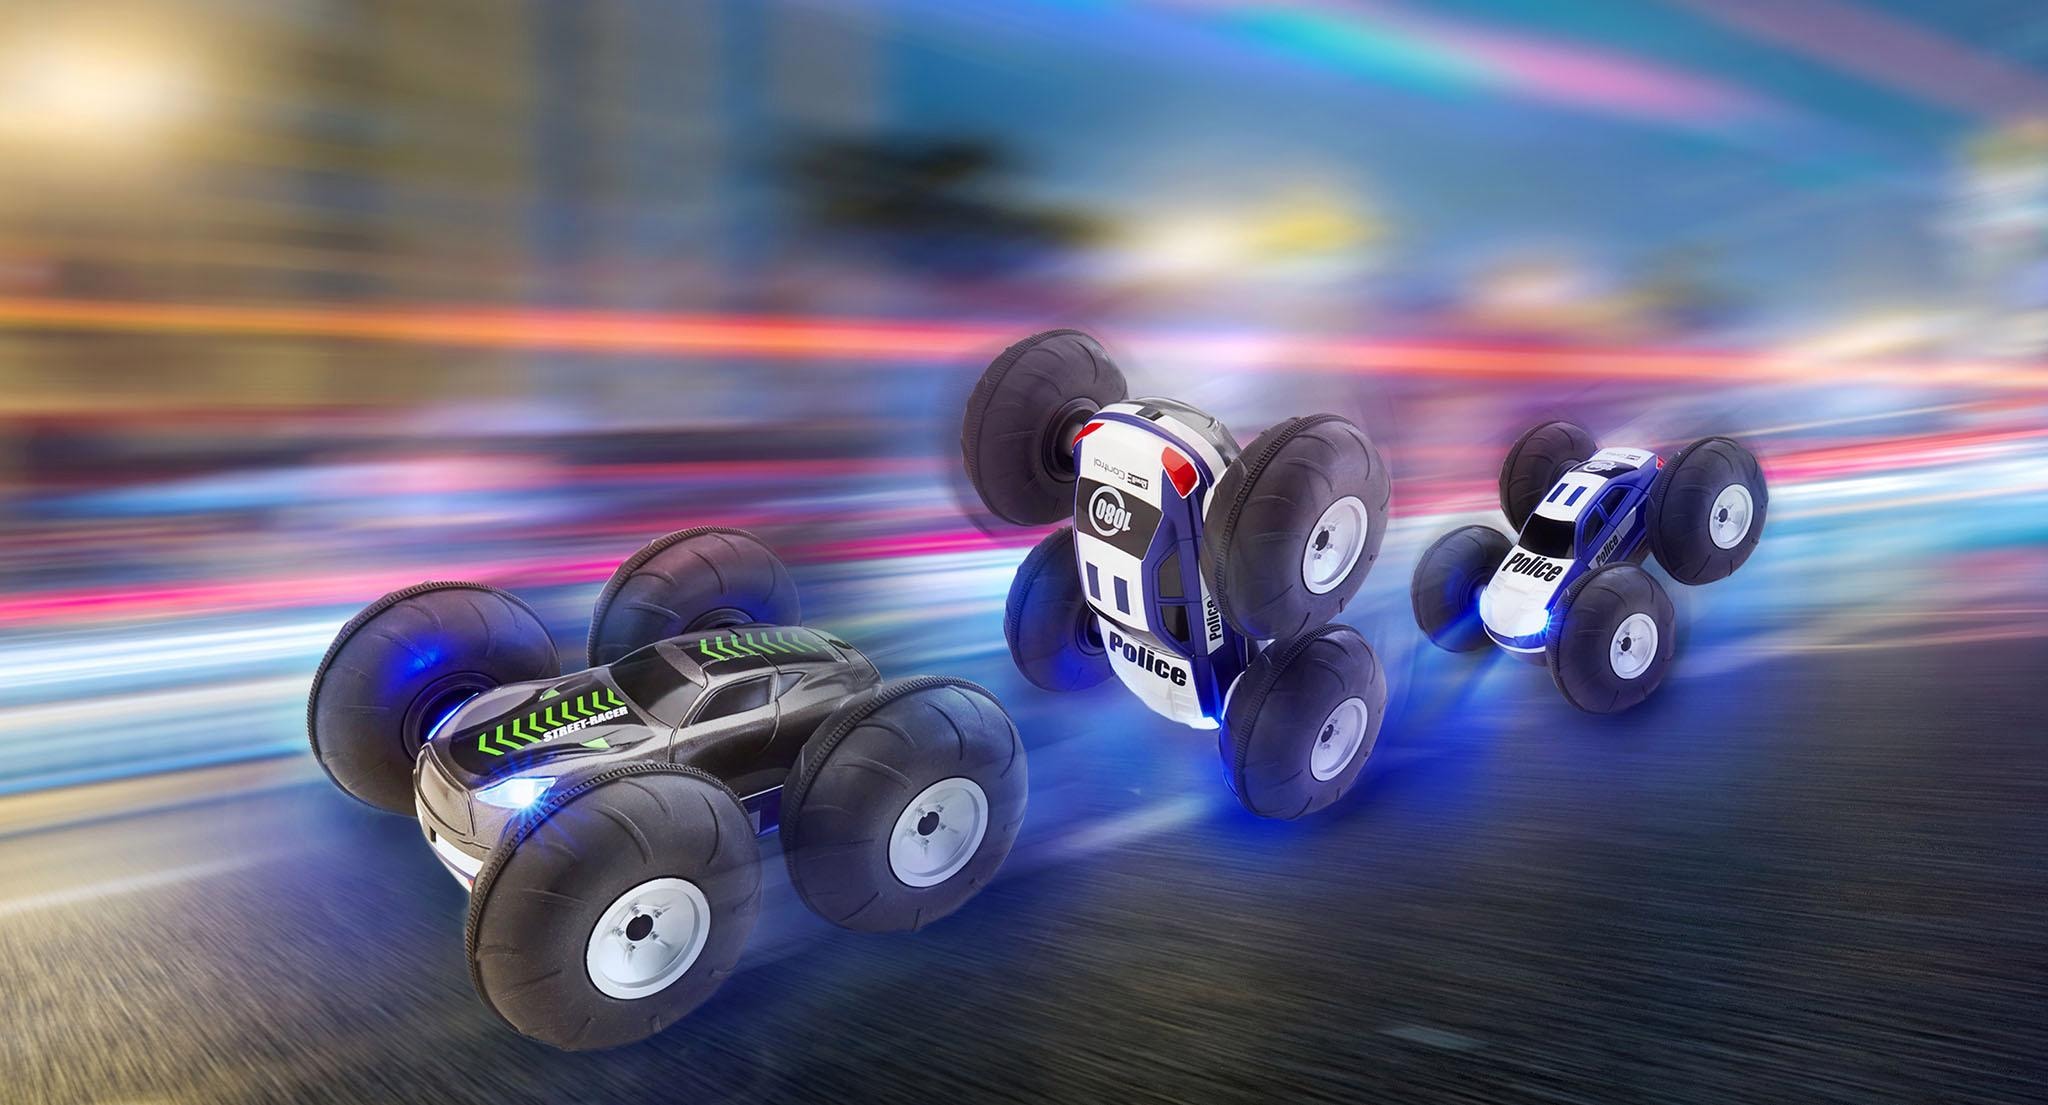 Revell® RC-Auto »Revell® control, Stunt Car Flip Racer«, mit LED-Beleuchtung